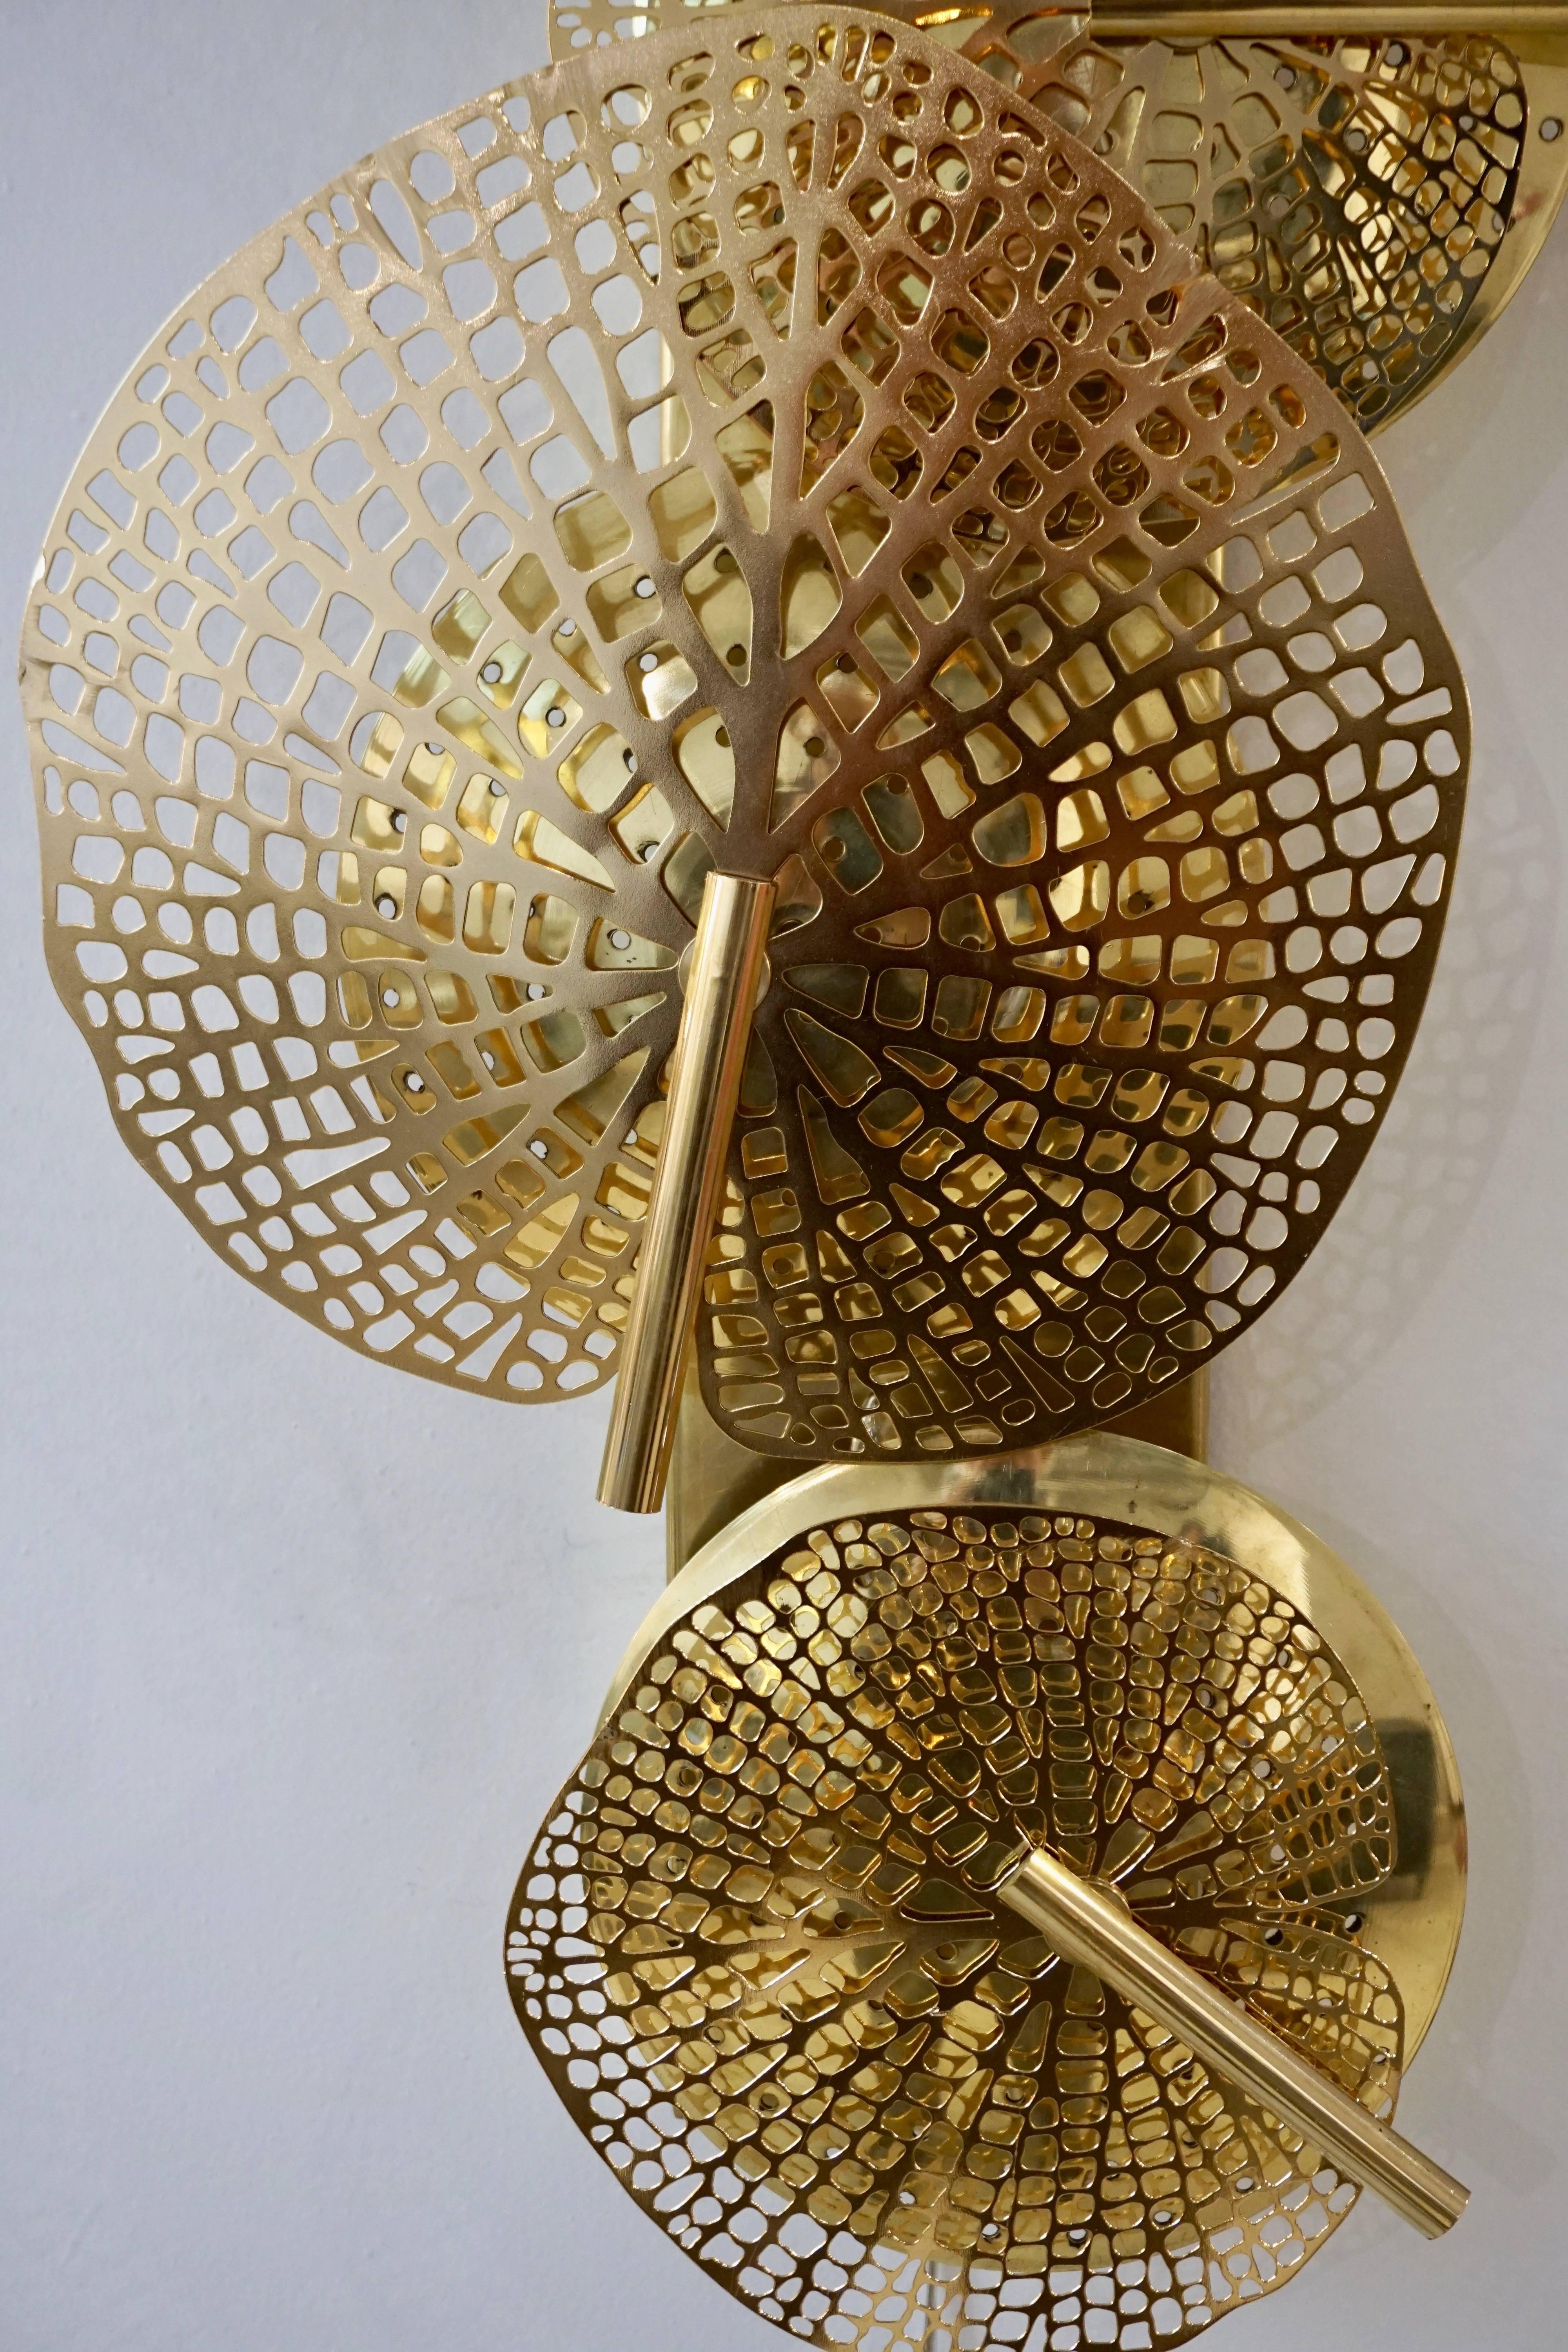 Polished Contemporary Organic Italian Art Design Pair of Perforated Brass Leaf Sconces For Sale